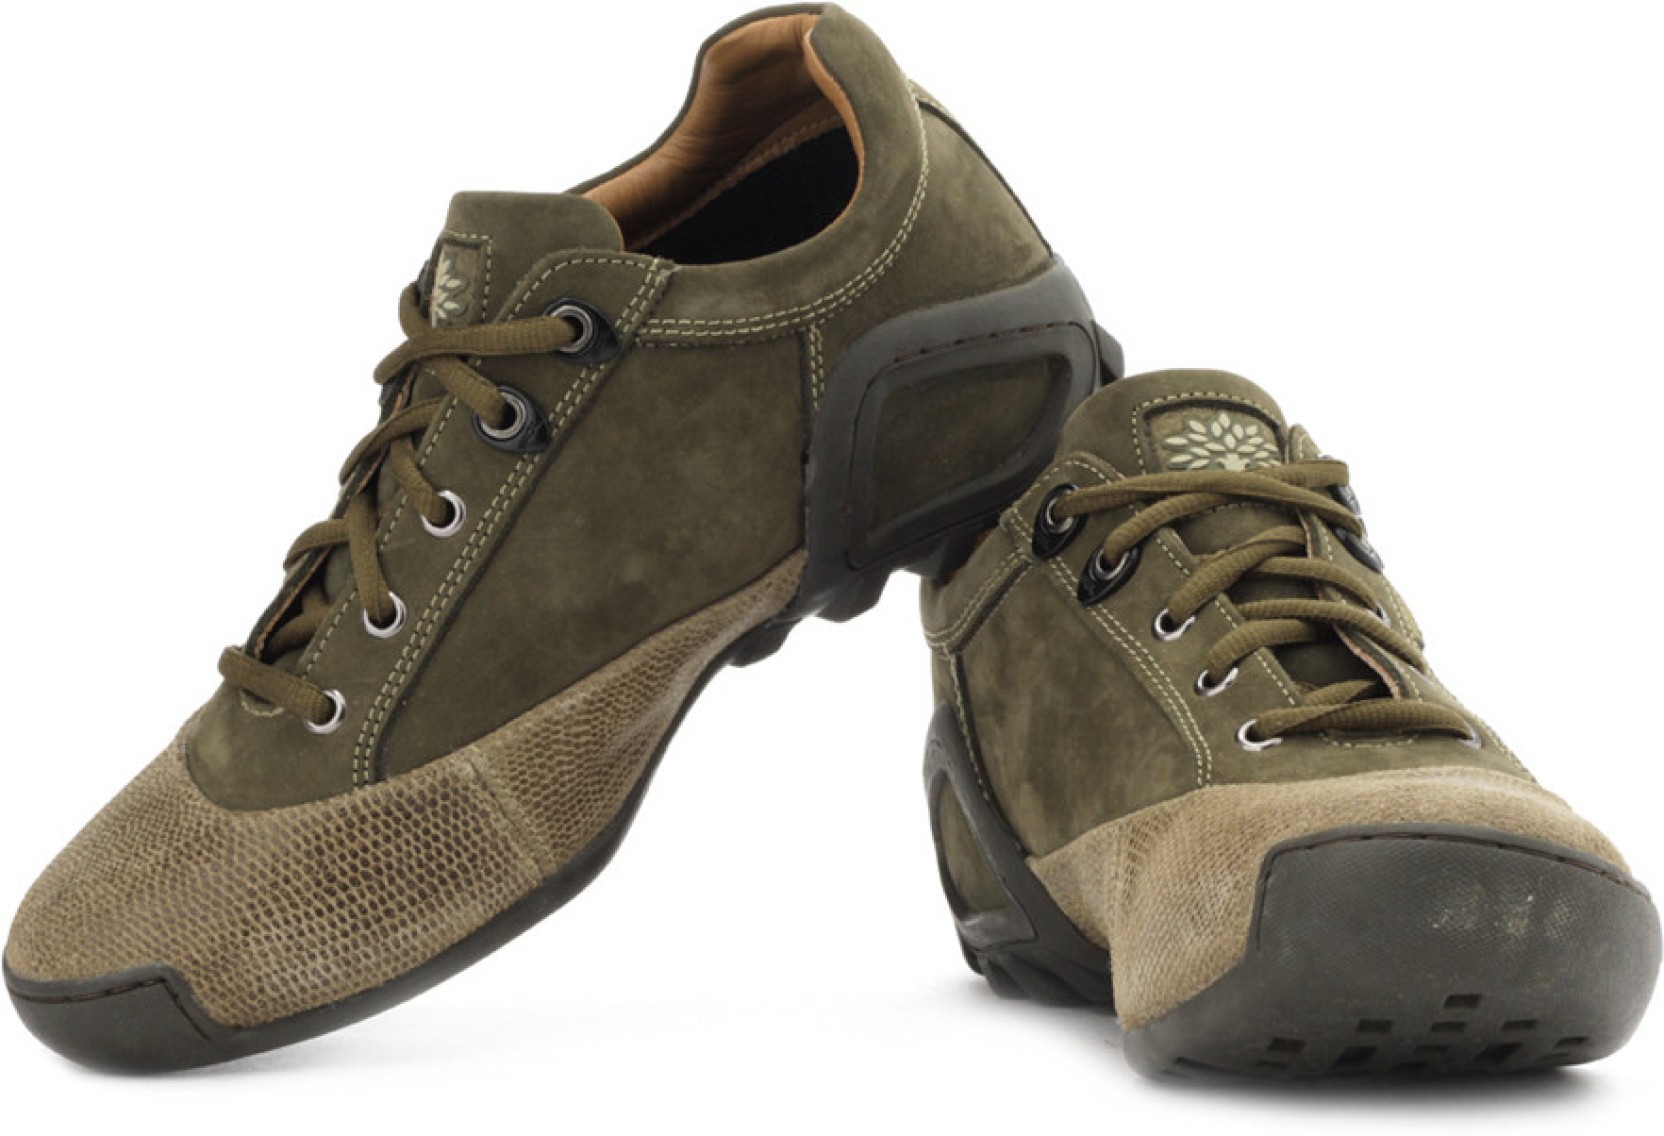 Woodland Outdoors Shoes - Buy Green Color Woodland Outdoors Shoes ...